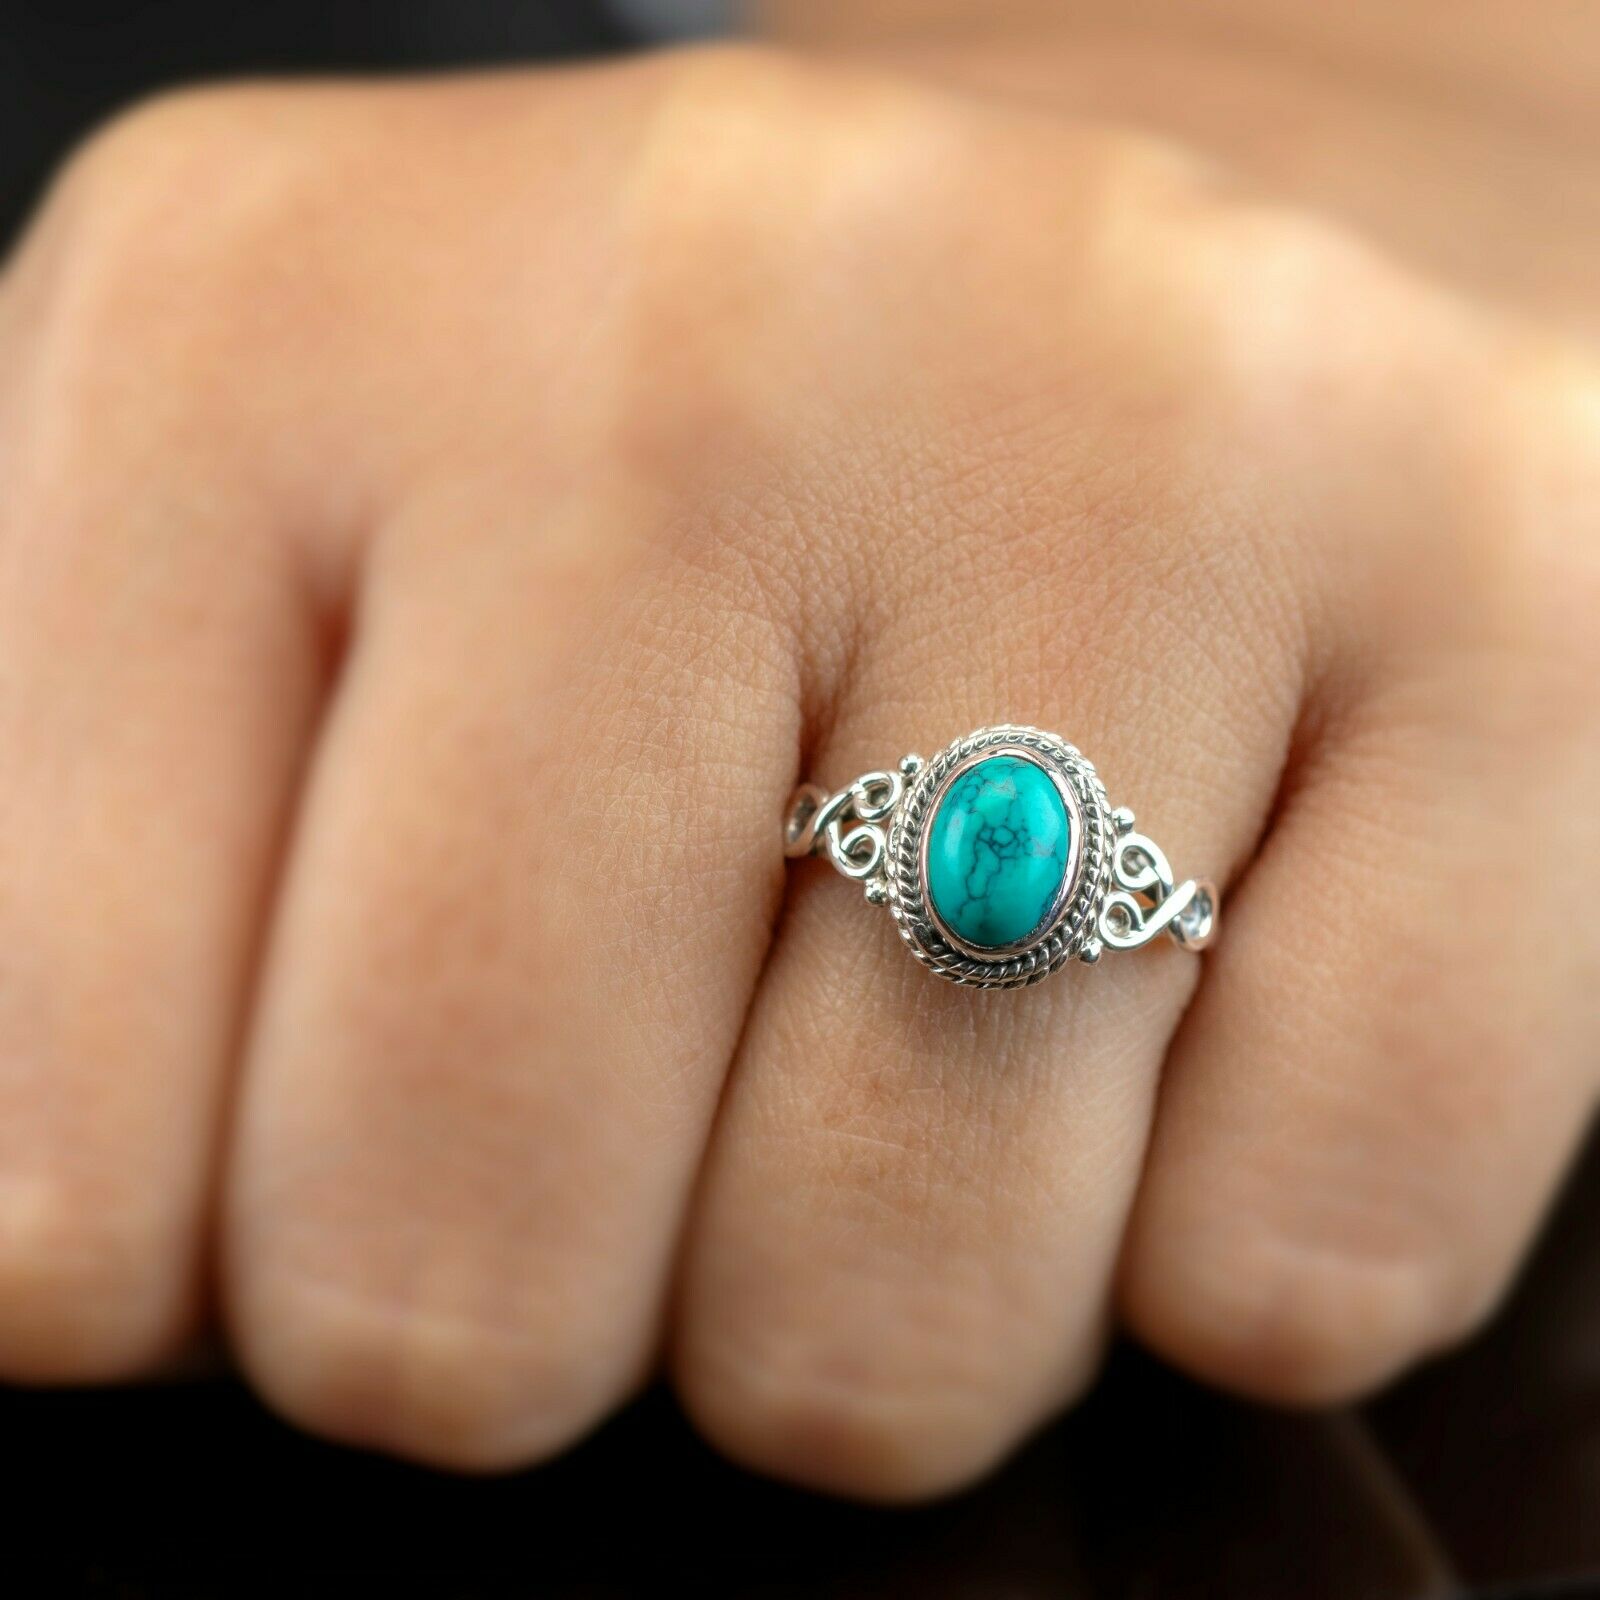 Oval Cut 925 Sterling Silver Ladies Turquoise Ring Gemstone Jewellery Gift Boxed